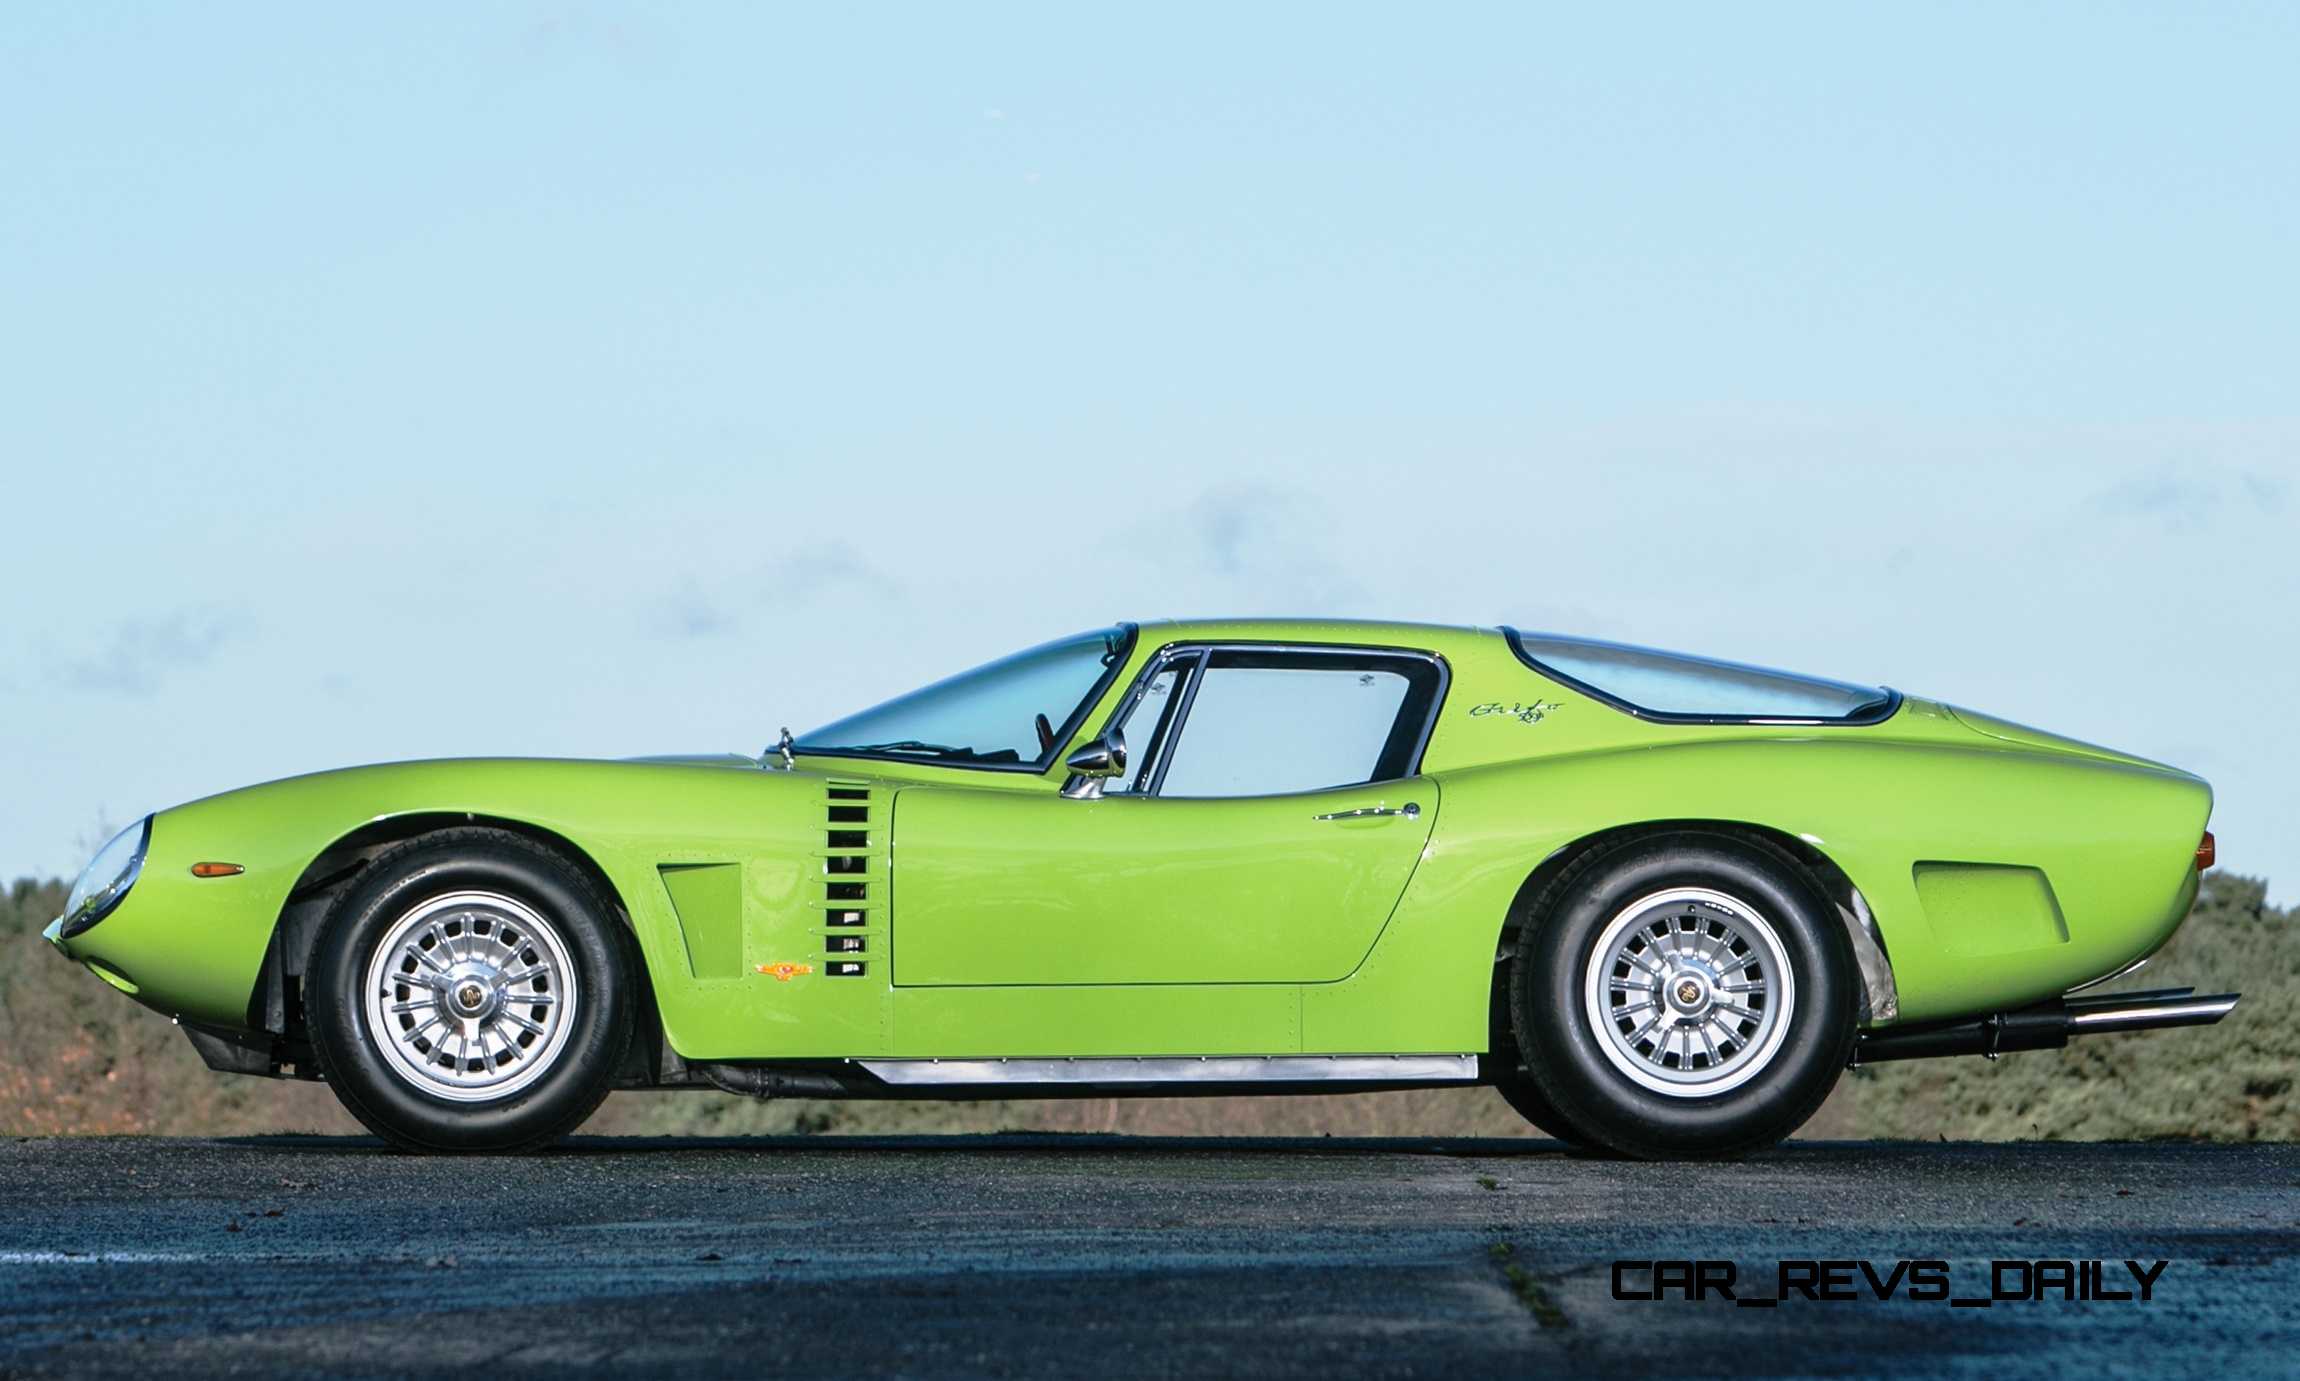 http://www.car-revs-daily.com/file/2014/12/1965-Iso-Grifo-A3C-Stradale-5.jpg